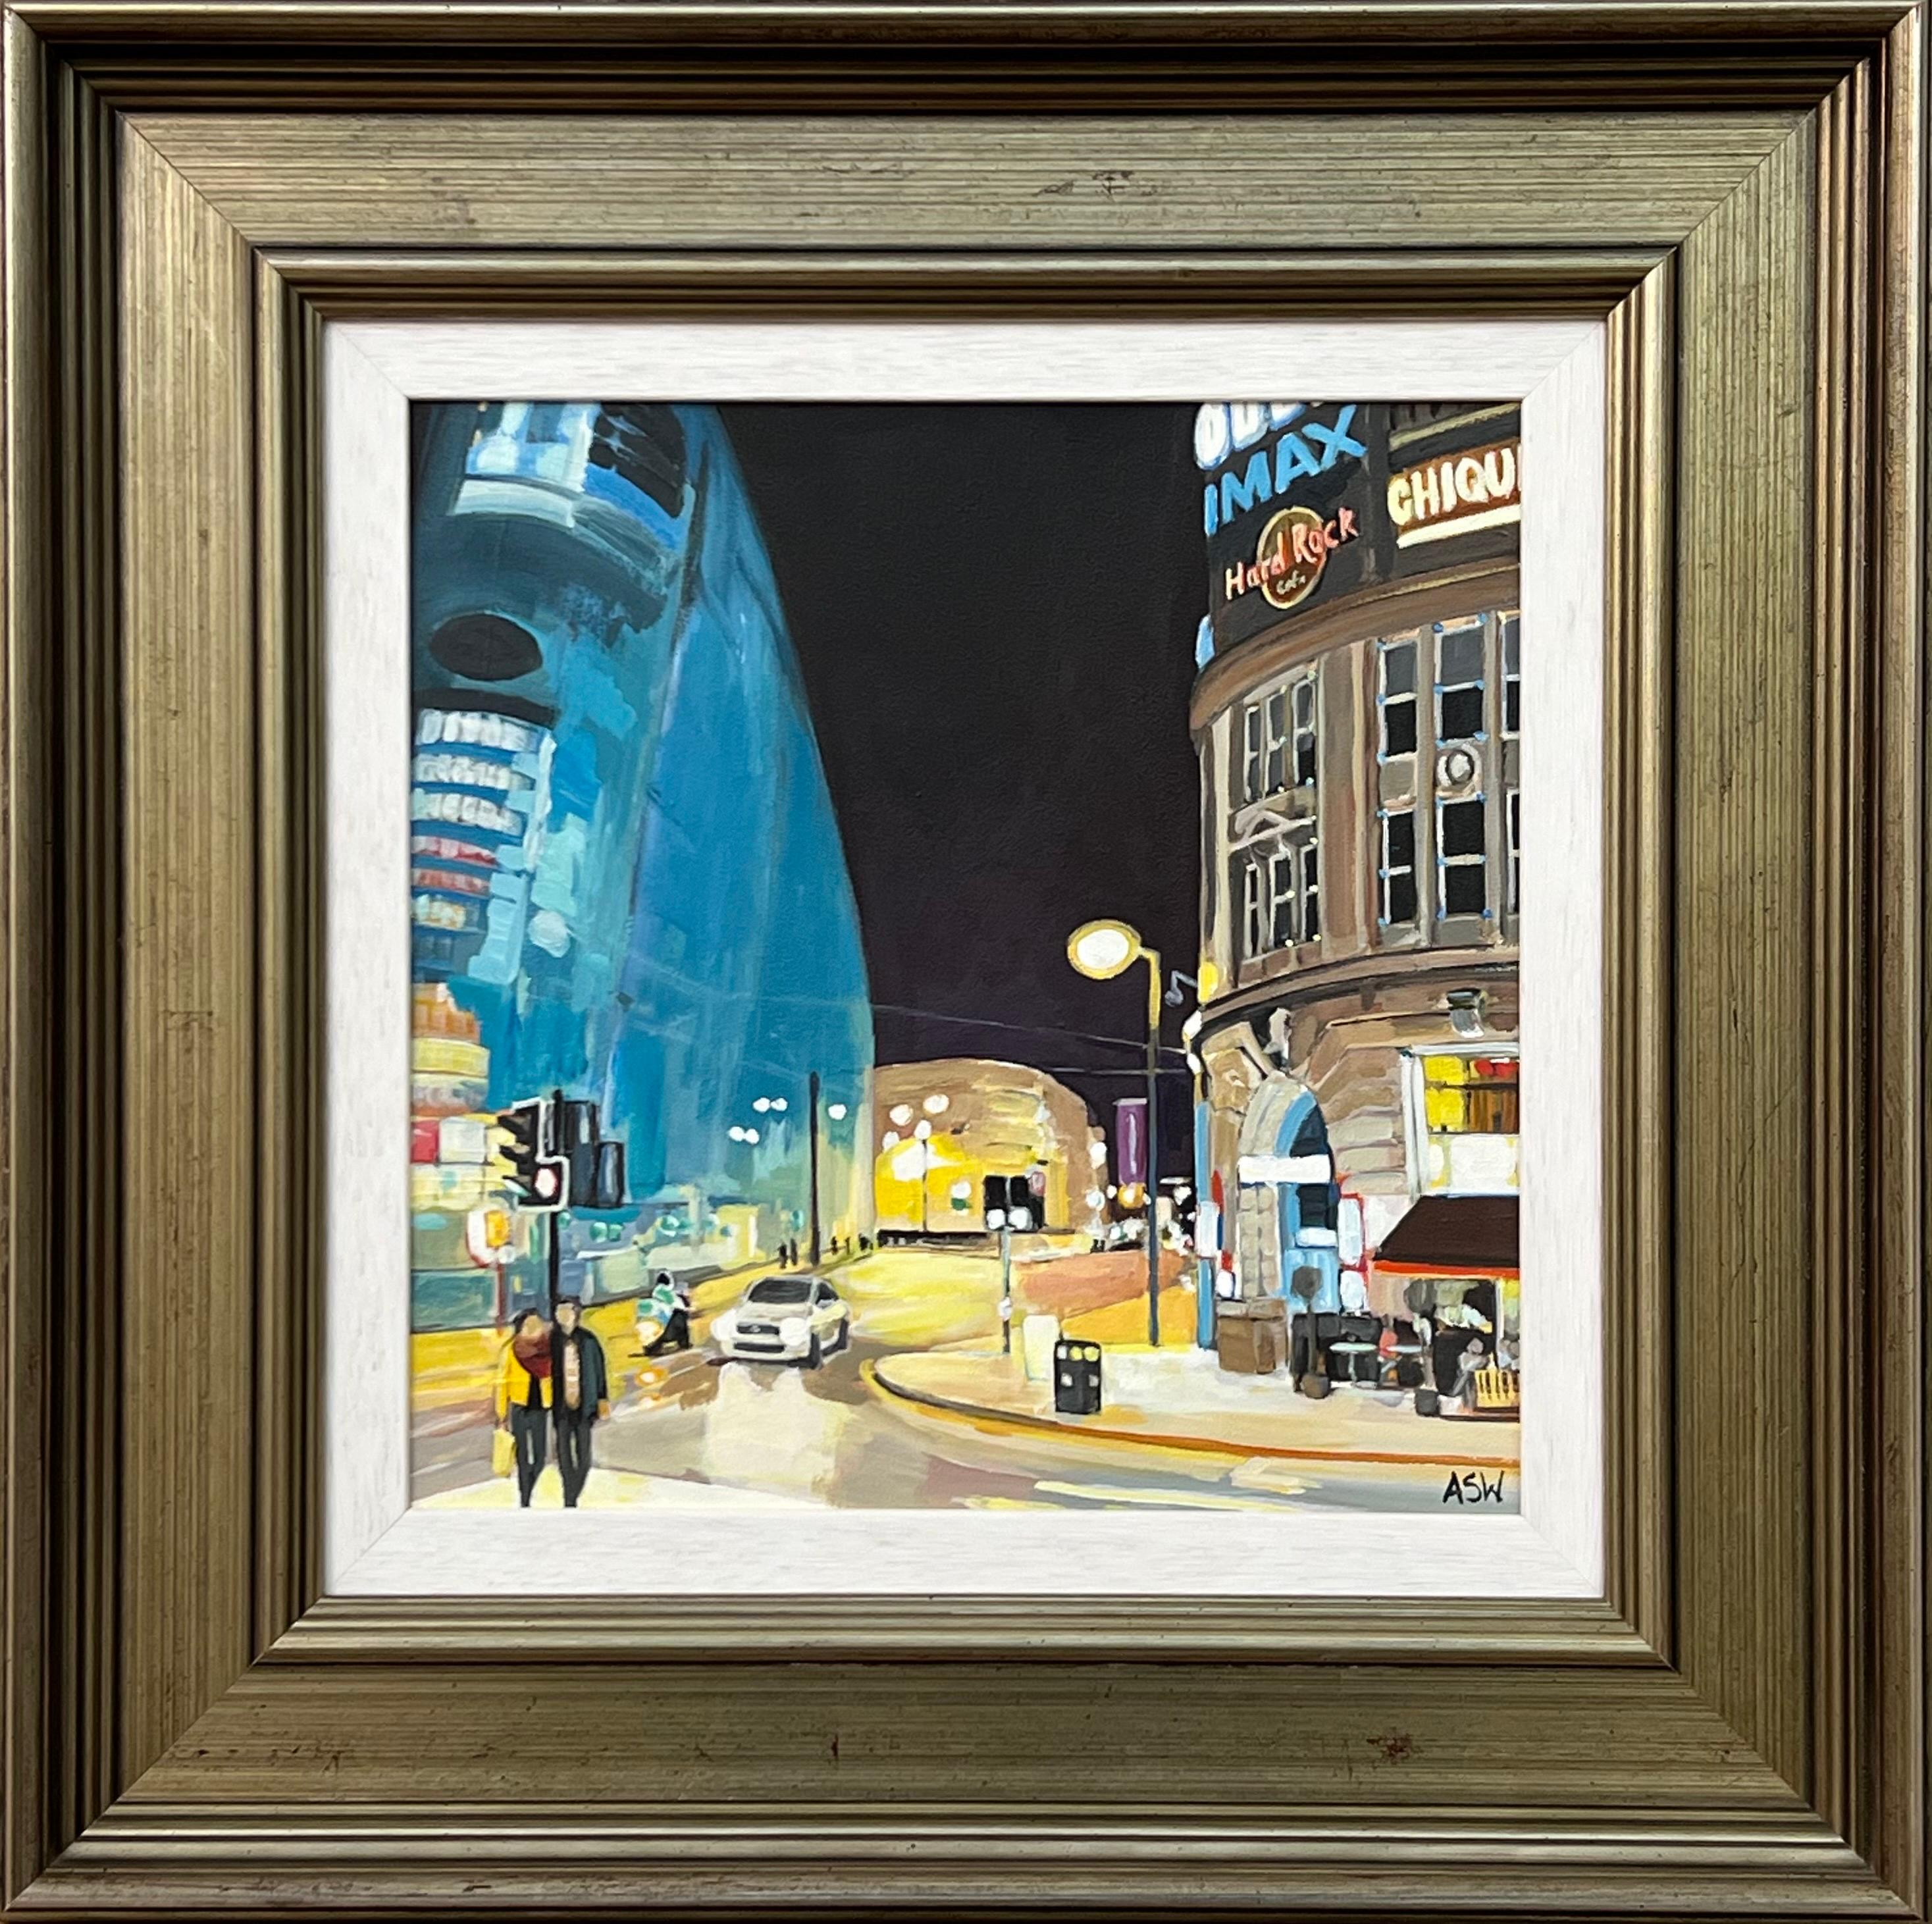 Angela Wakefield Landscape Painting - Urbis at Night in Manchester City by Contemporary British Urban Landscape Artist